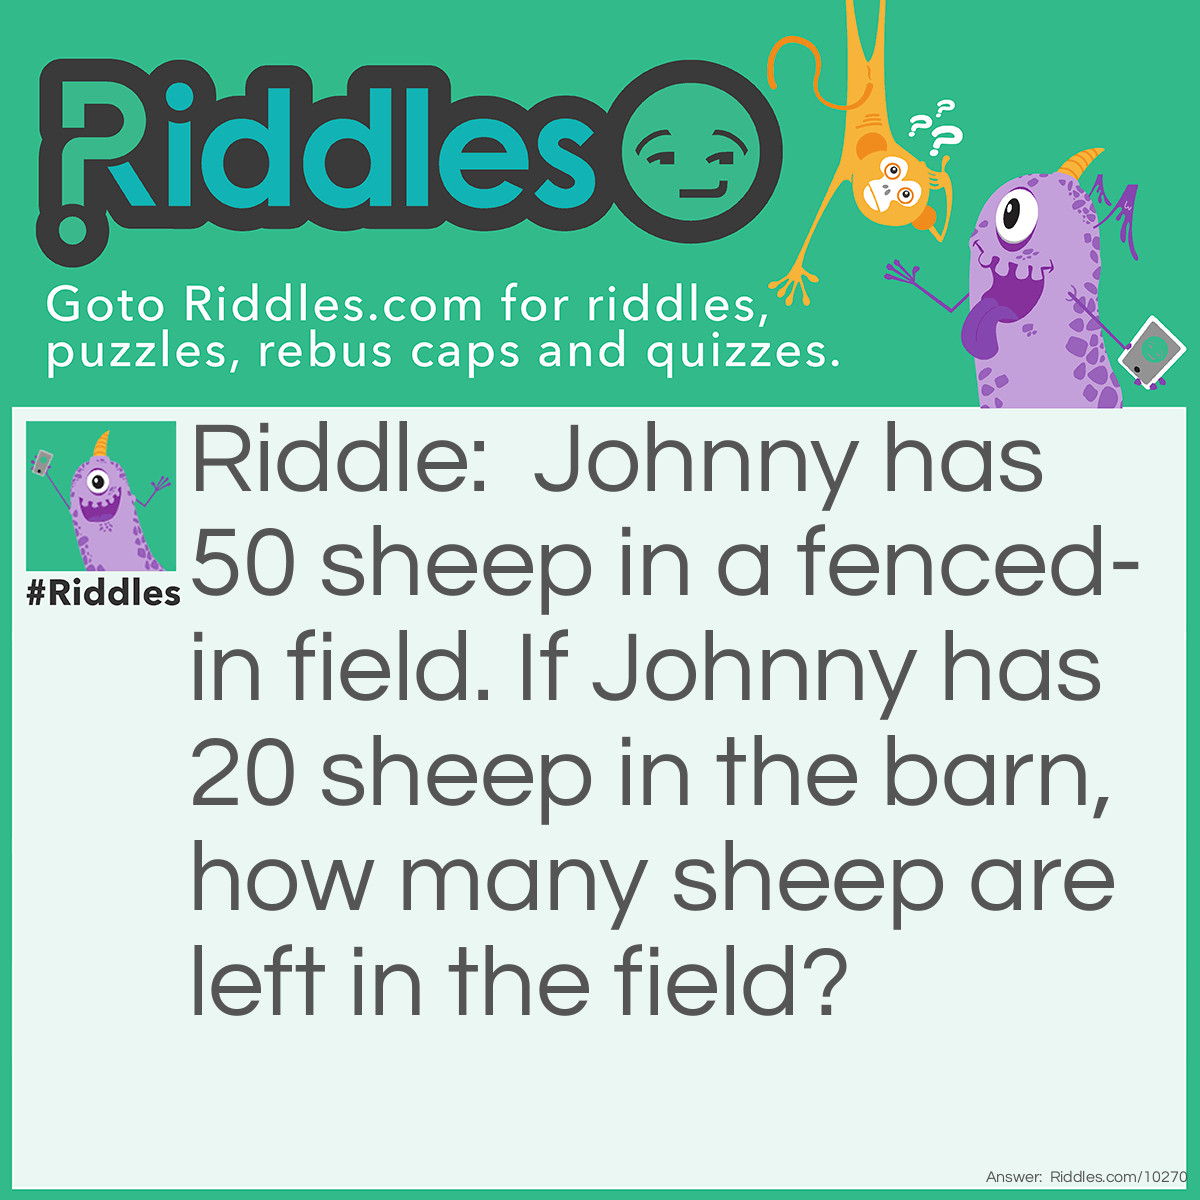 Riddle: Johnny has 50 sheep in a fenced-in field. If Johnny has 20 sheep in the barn, how many sheep are left in the field? Answer: 50 sheep.